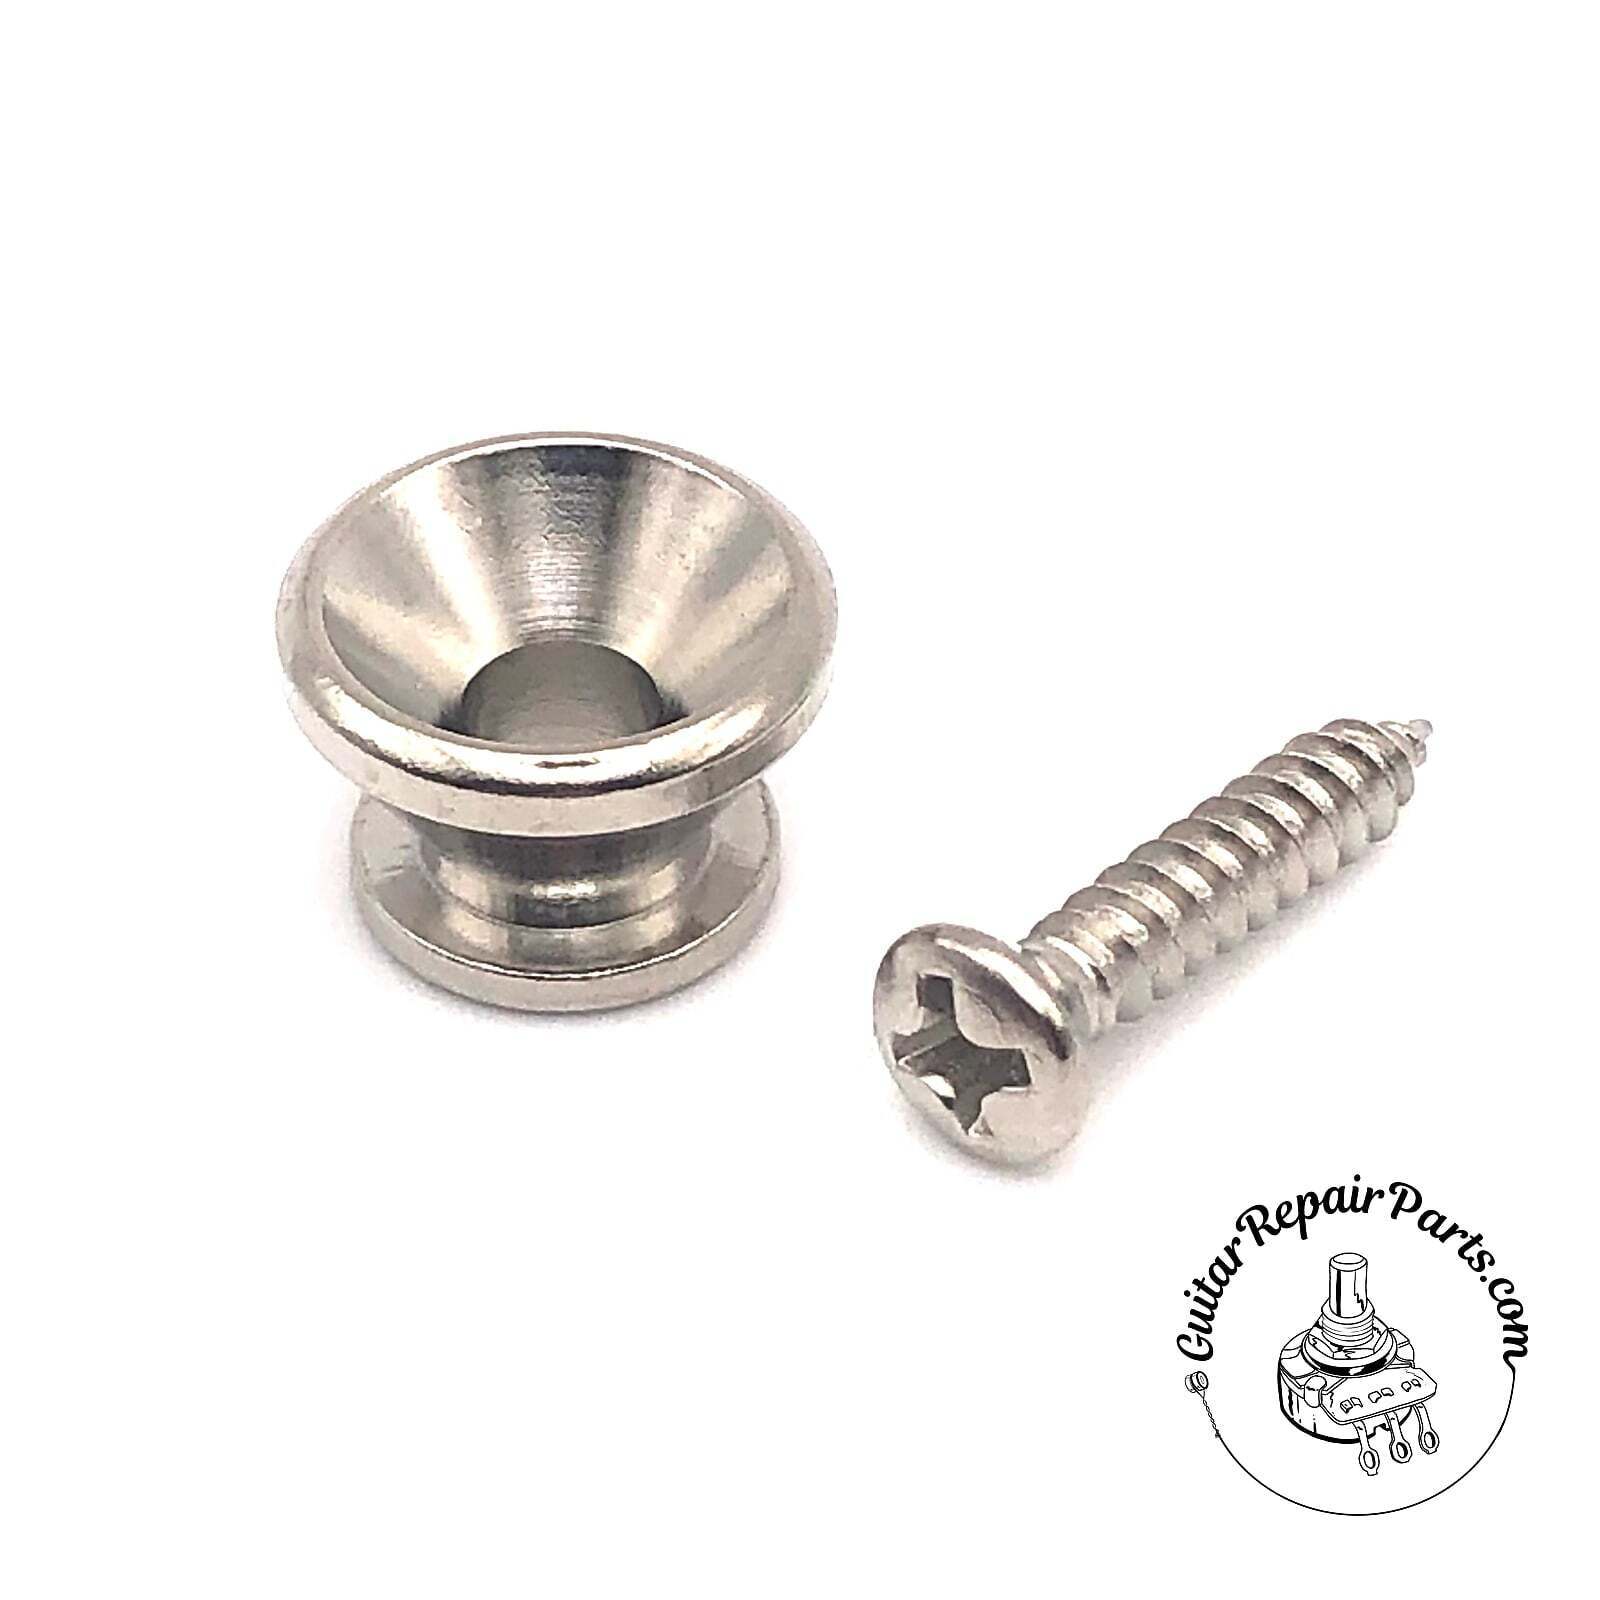 Taylor 4502 Strap Button And Screw For Neck Mount - Nickel